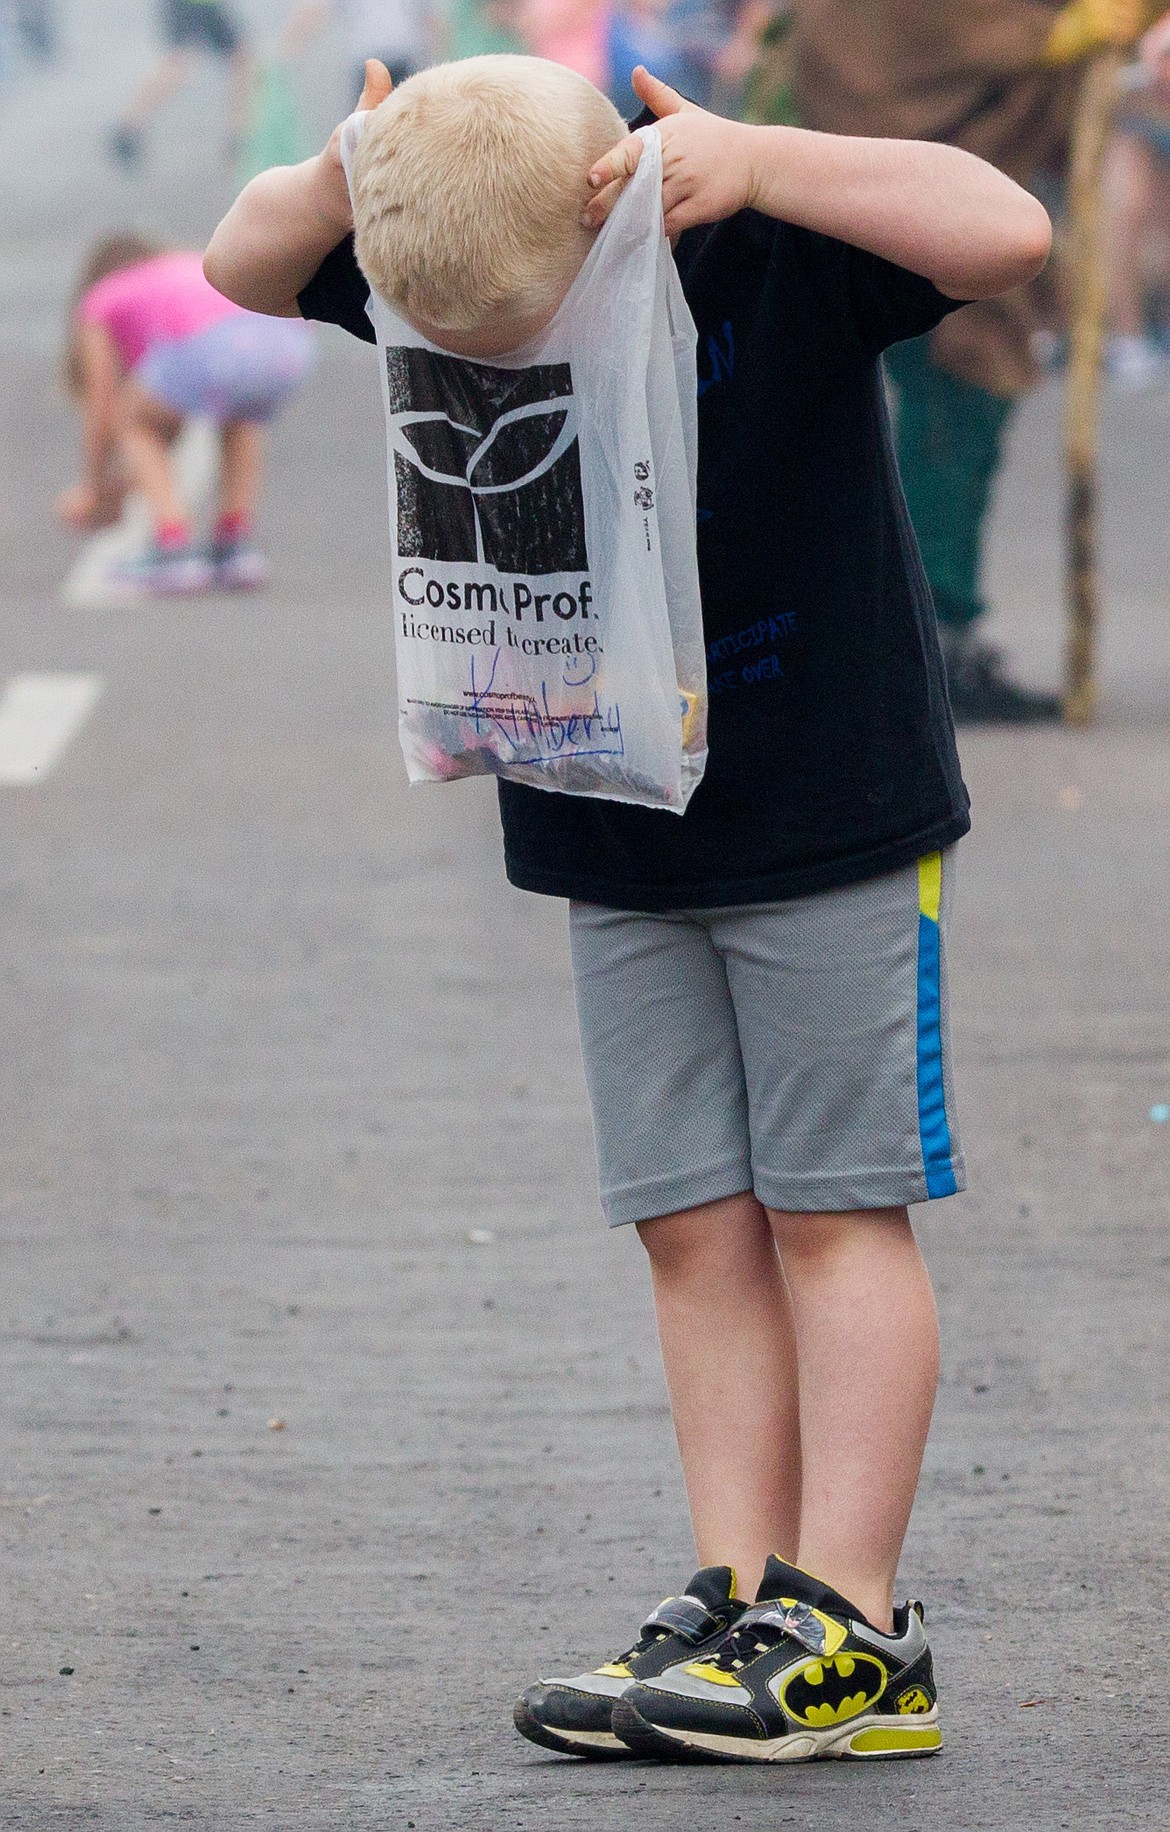 Bridger Rebo surveys the candy he chased down during the 2017 Nordicfest Heritage Festival parade on Saturday, Sept. 9, 2017. (John Blodgett/The Western News)